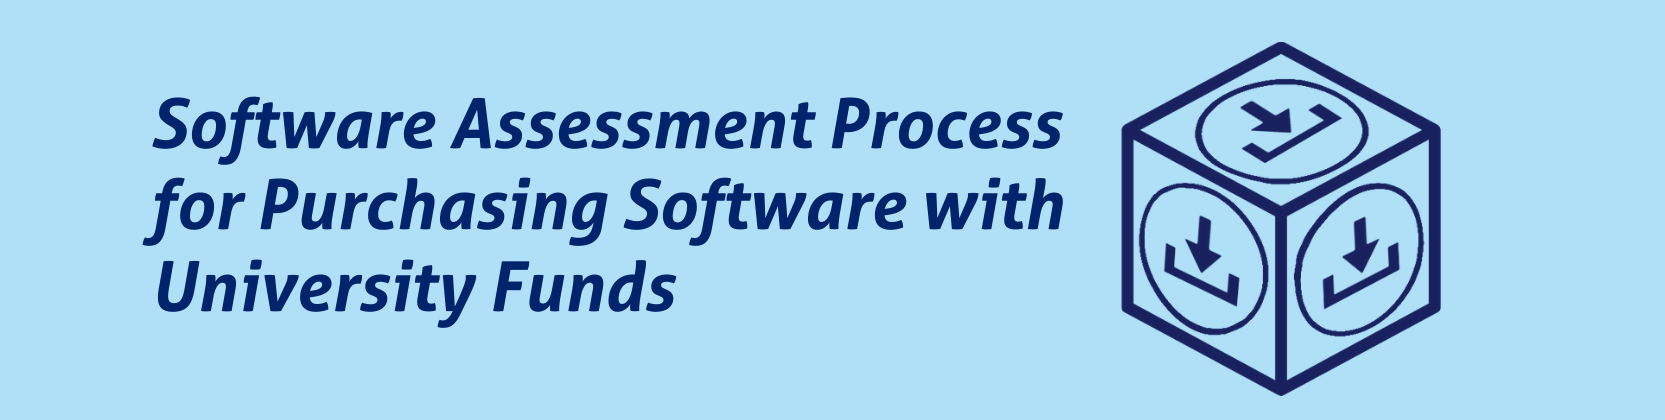 Software Assessment Process Page Banner 